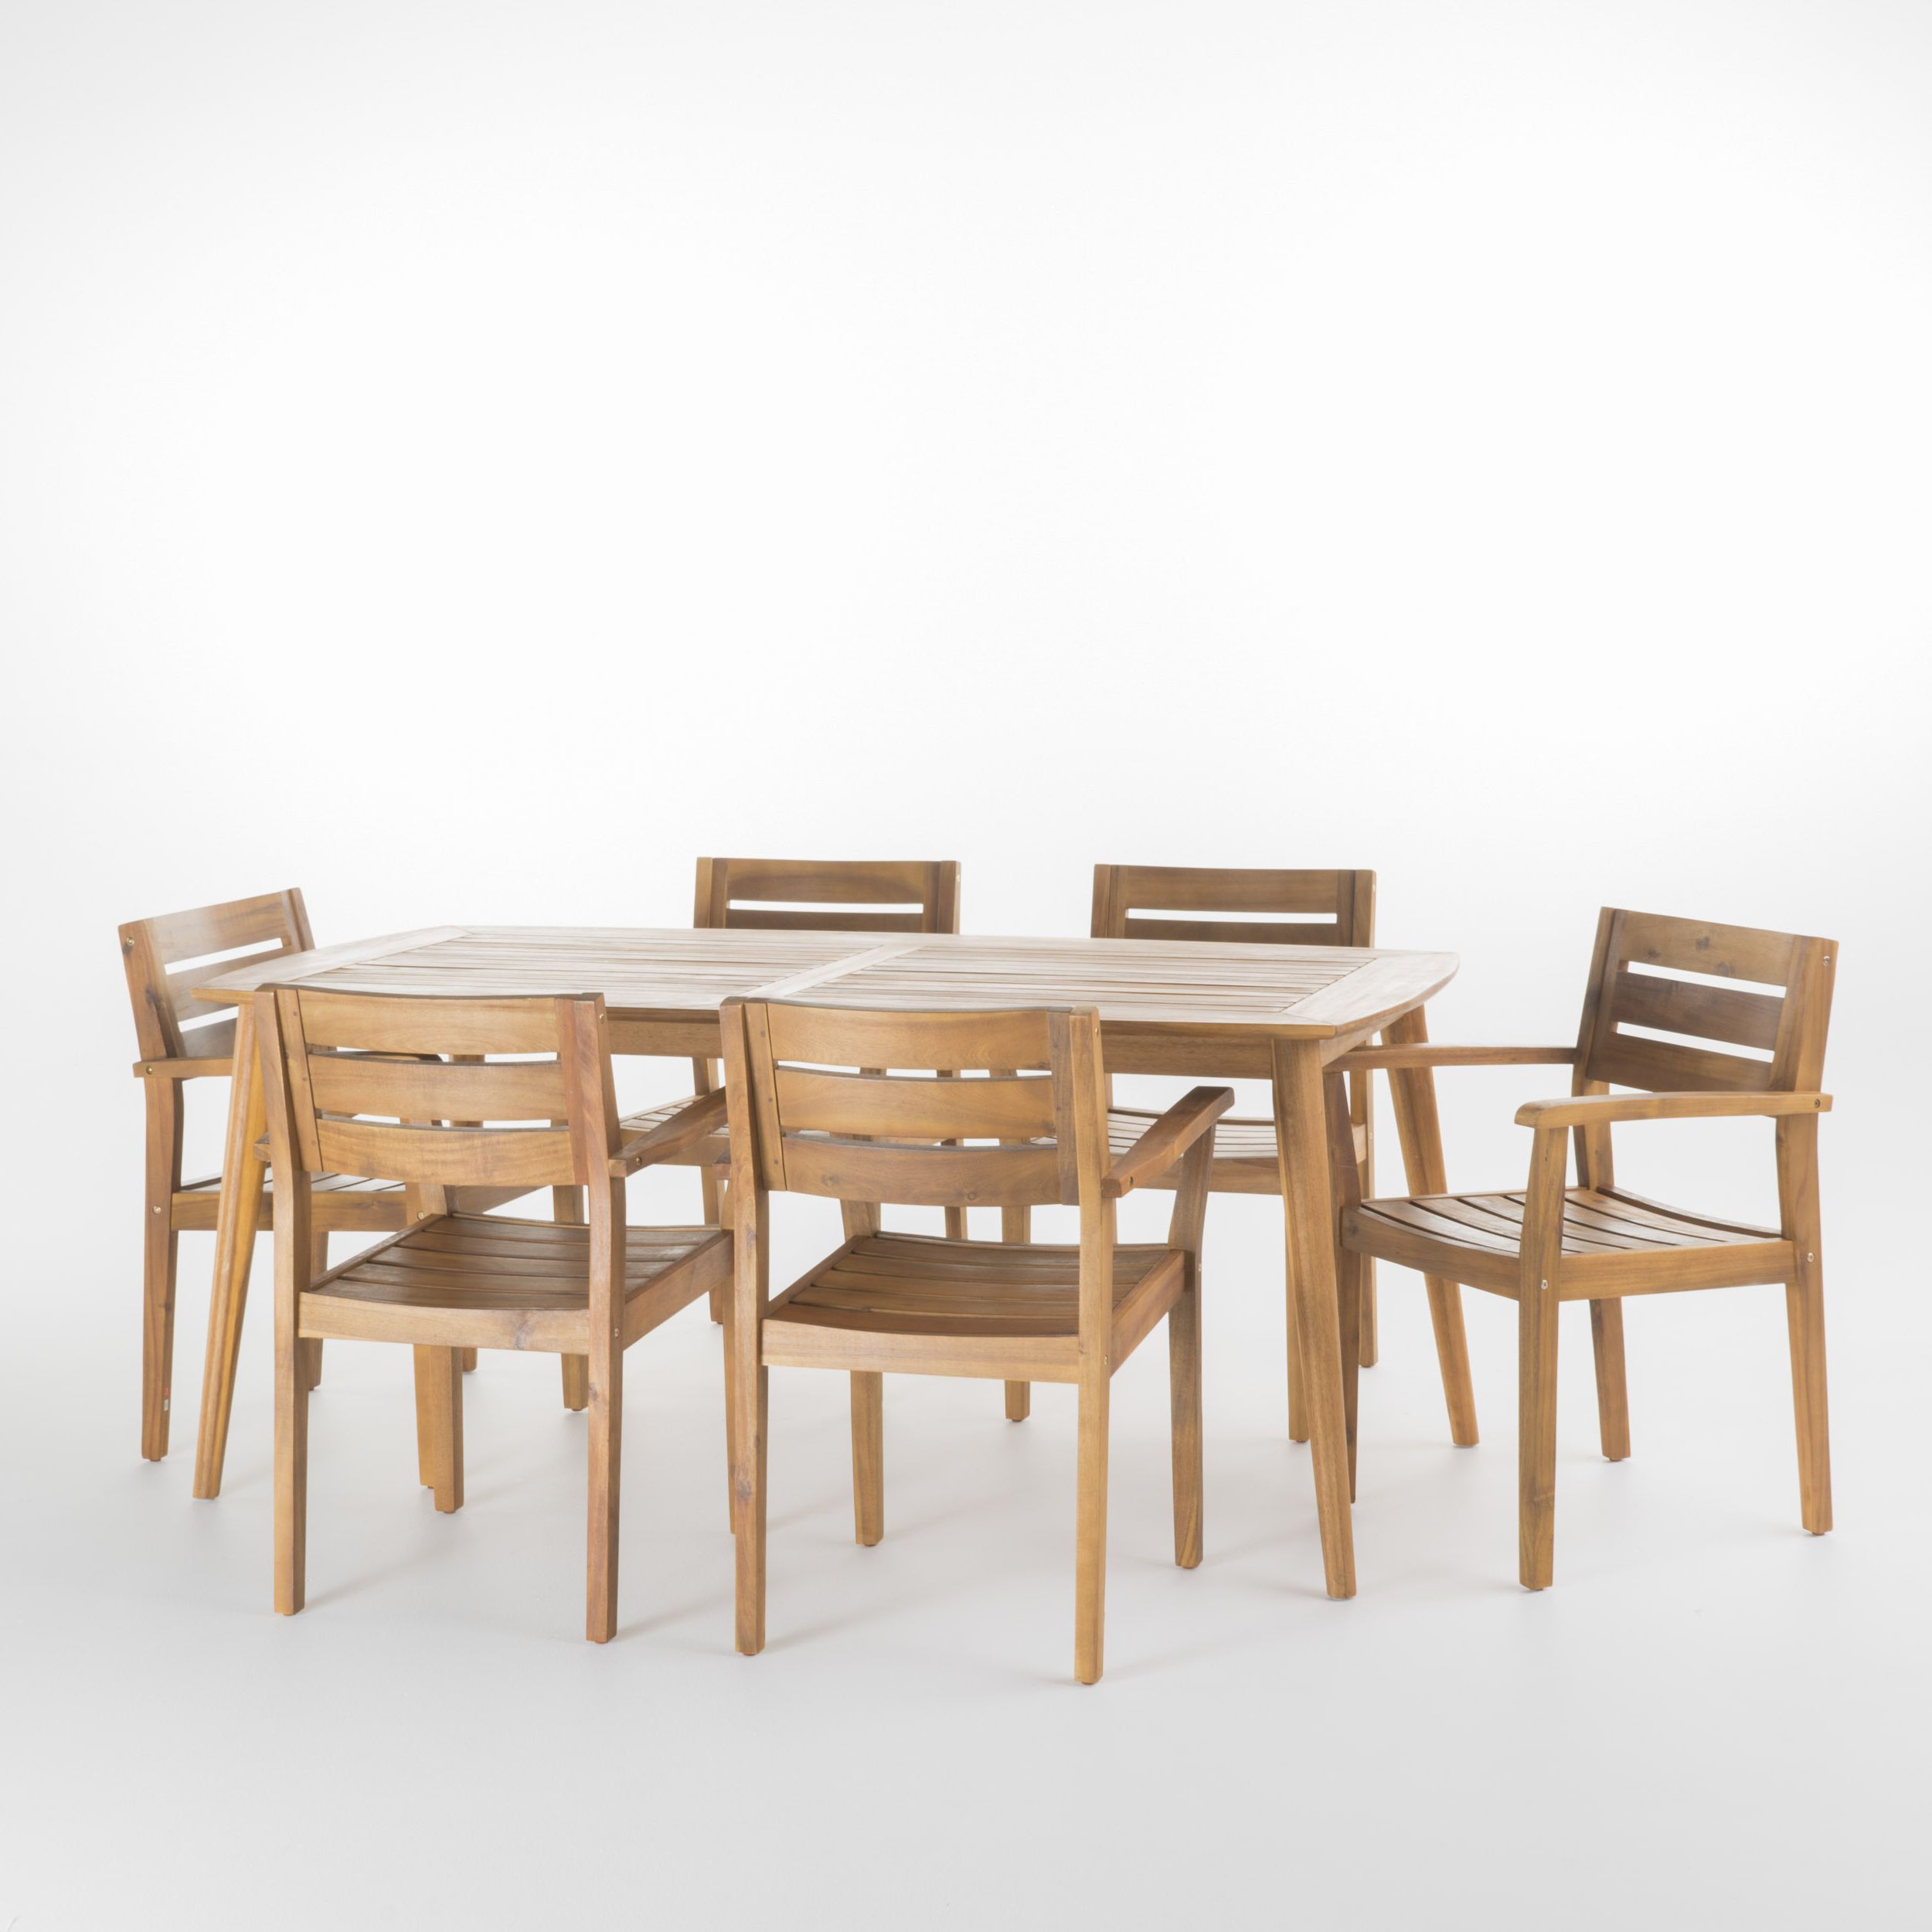 Best And Newest Stanford Outdoor Acacia Wood 7 Piece Rectangular Dining Set, Teak Pertaining To Teak Outdoor Square Dining Sets (View 15 of 15)